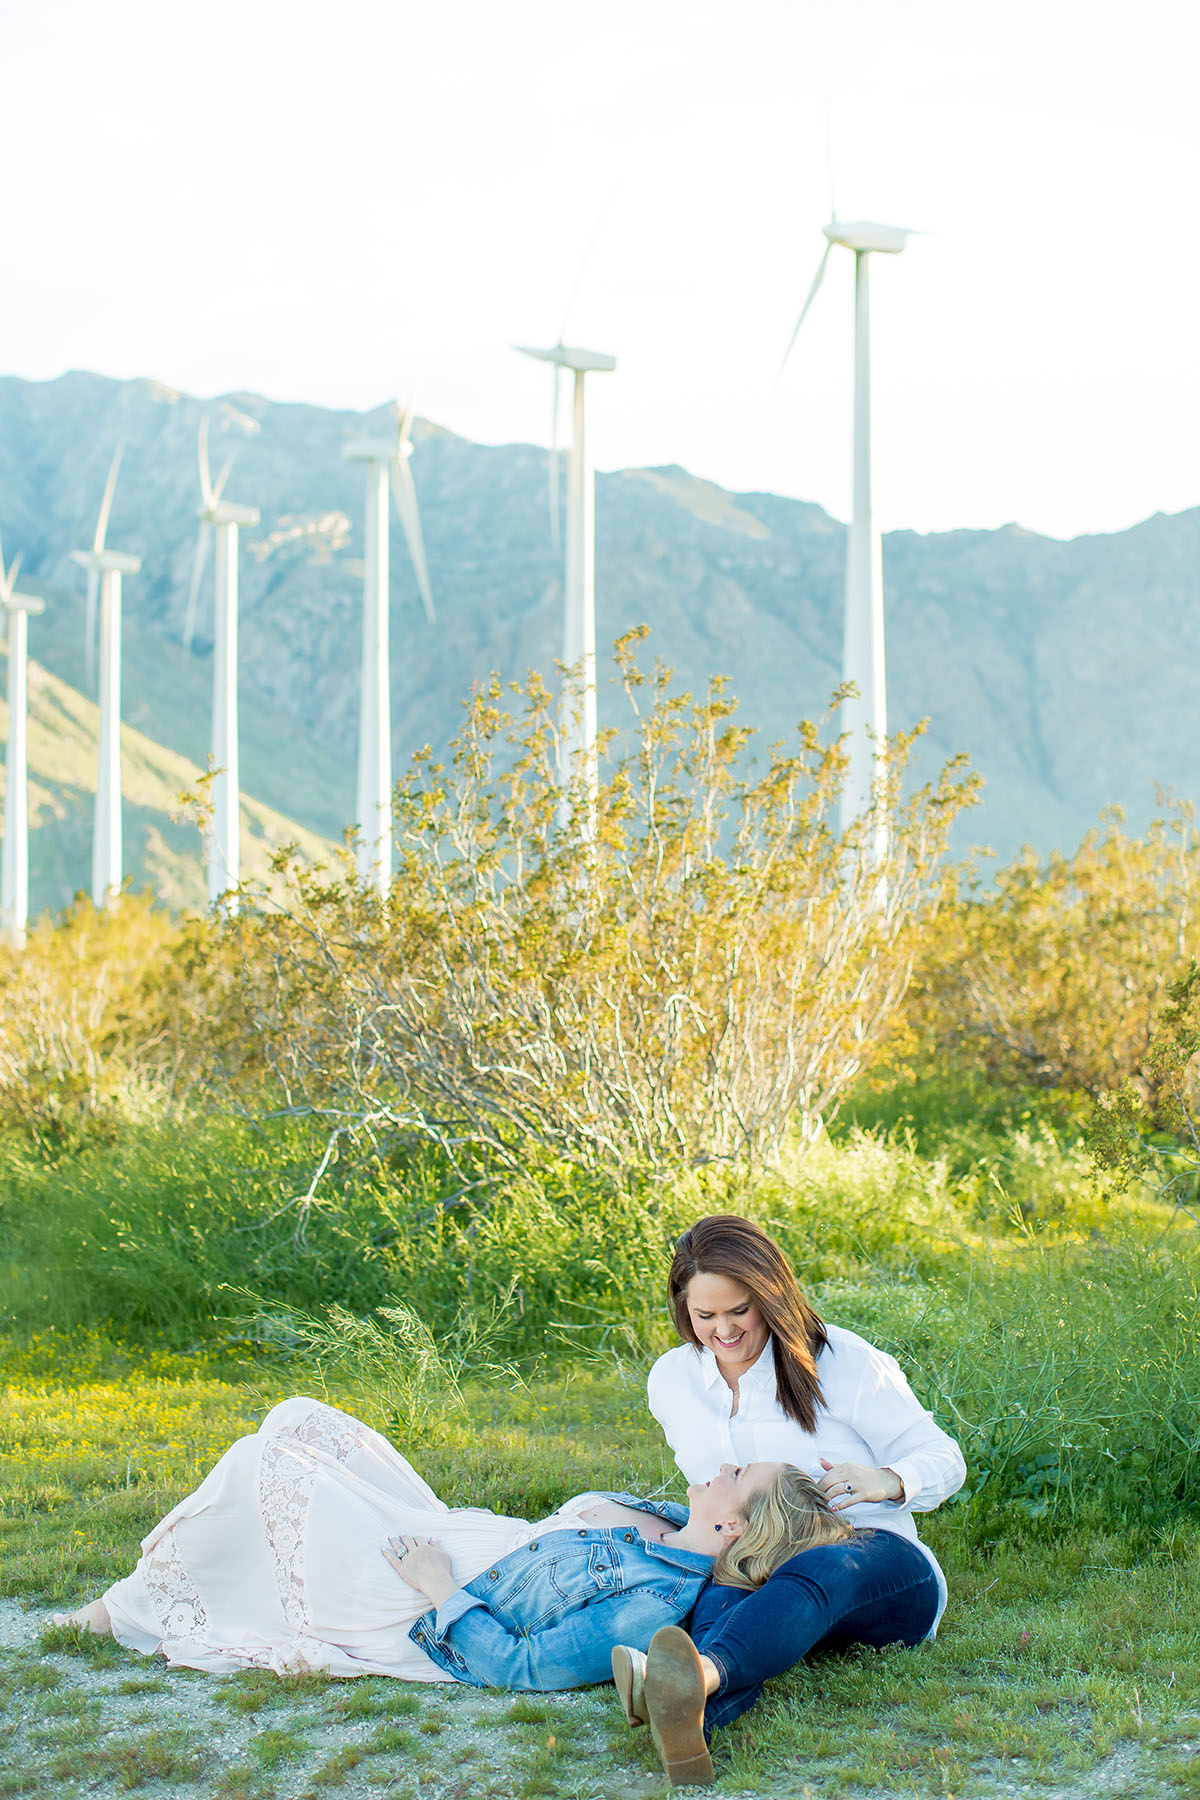 Sunset engagement photos in Palm Springs, California two brides engagement outdoors romantic cuddling